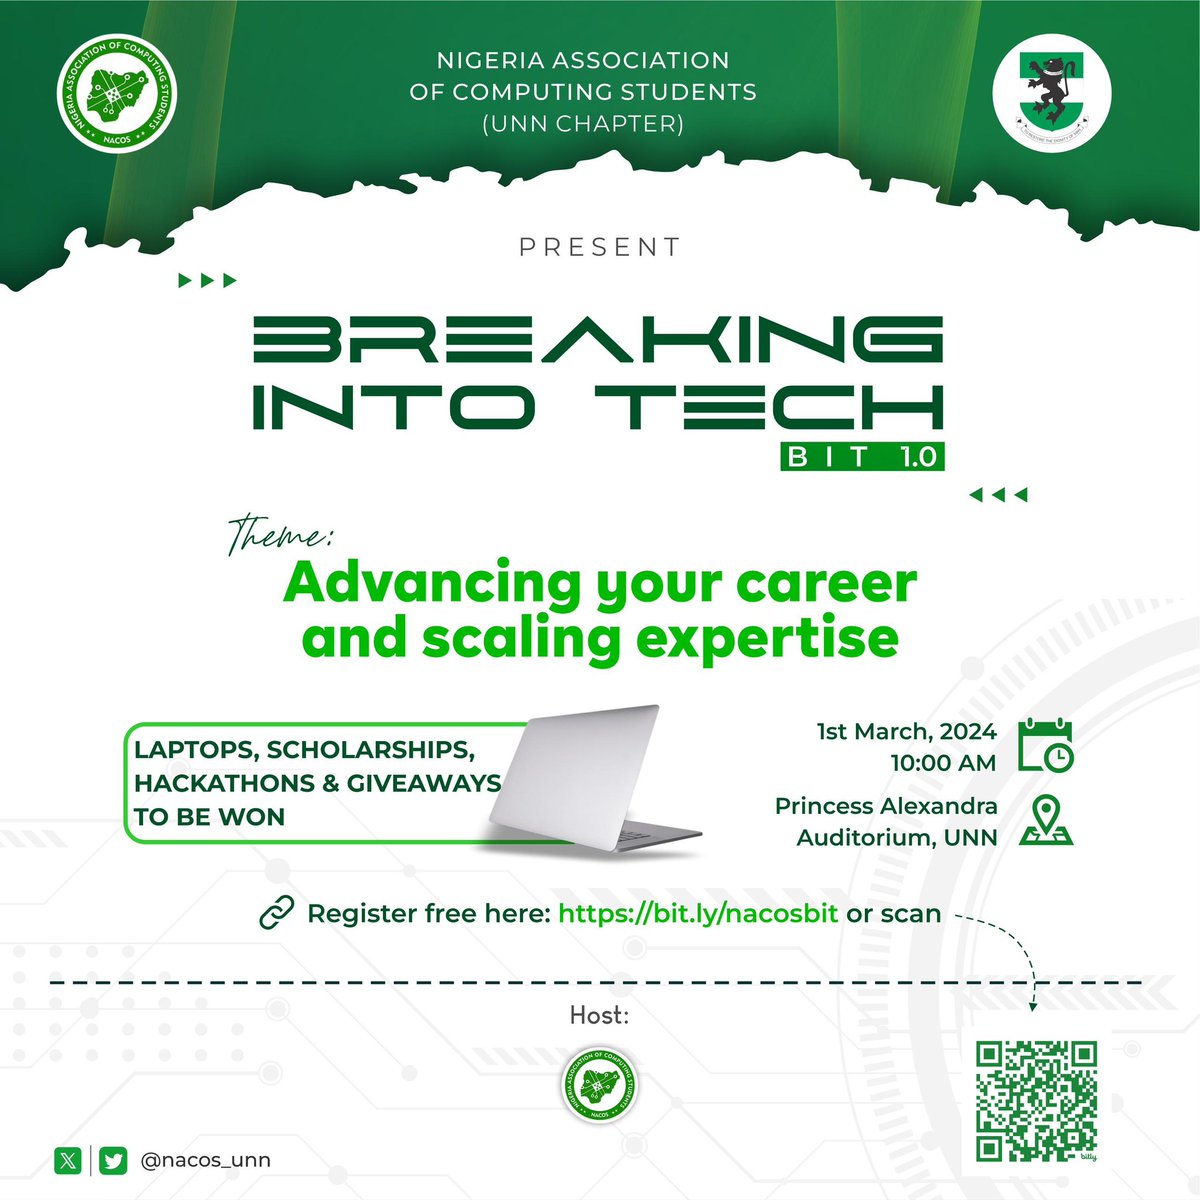 Never miss this for anything
@nacos_unn 
#breakingintotech
#bit1.0